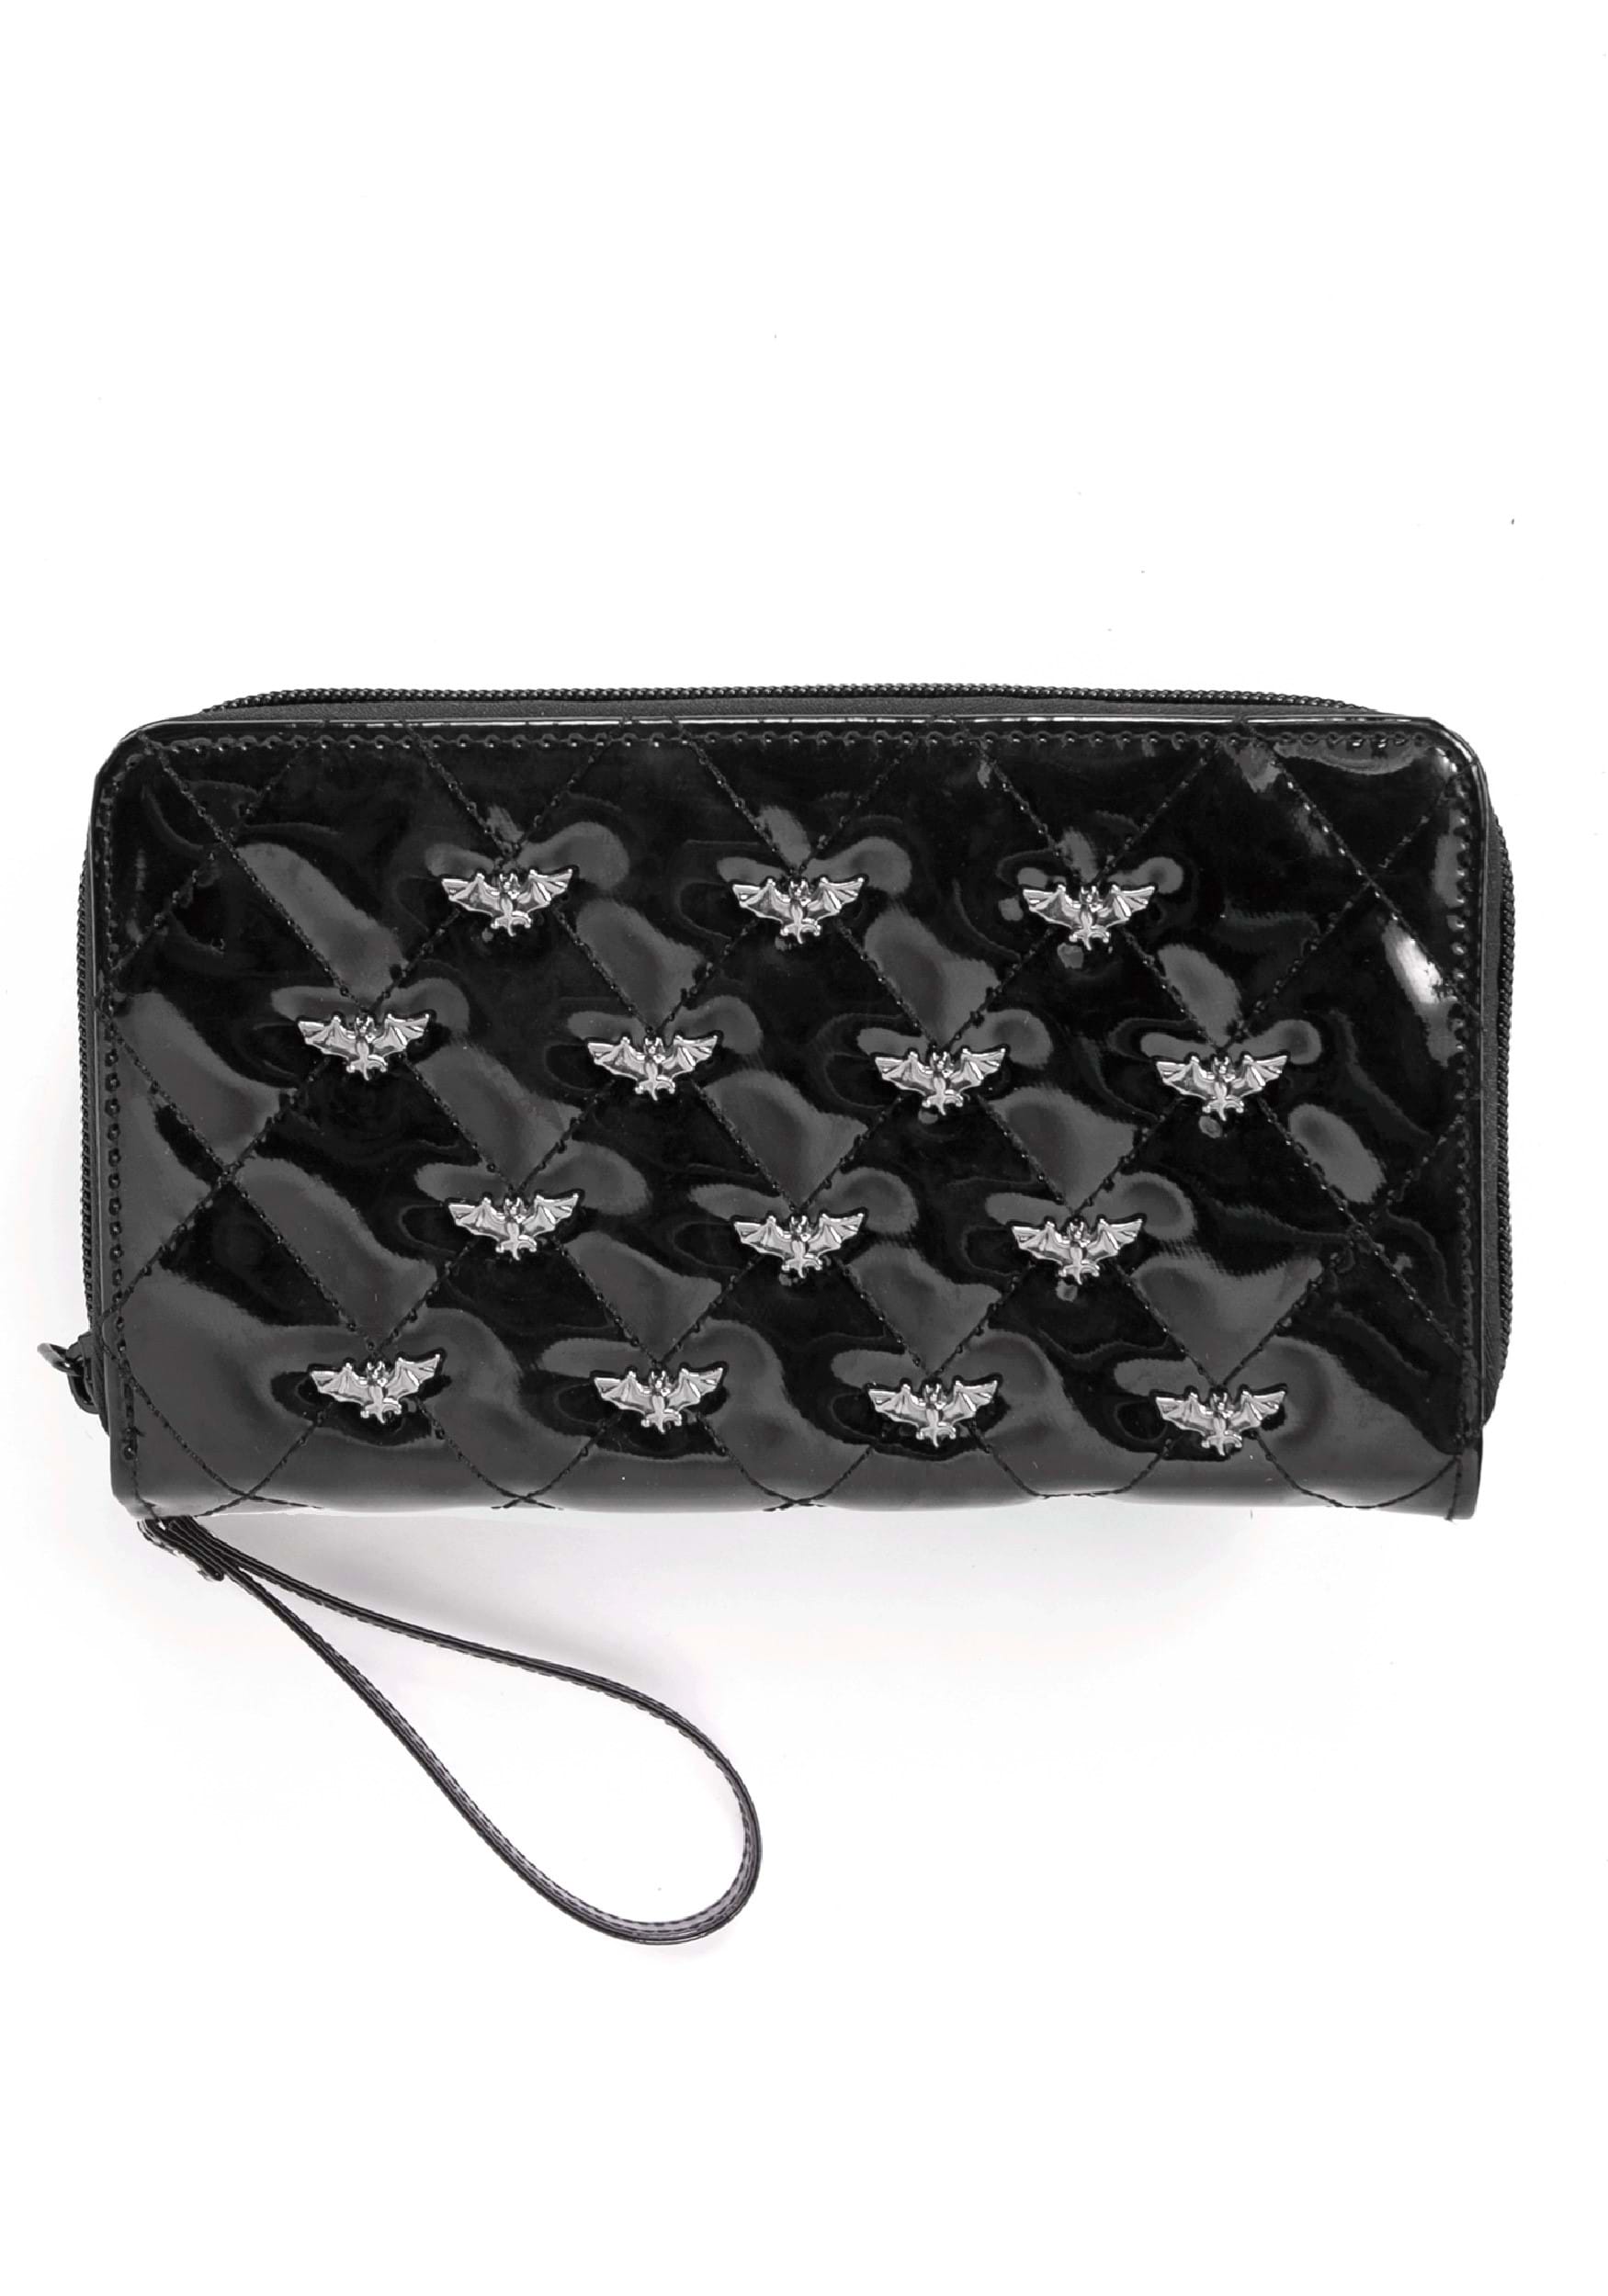 Bat Studded Quilted Faux Patent Black Wallet , Halloween Wallets